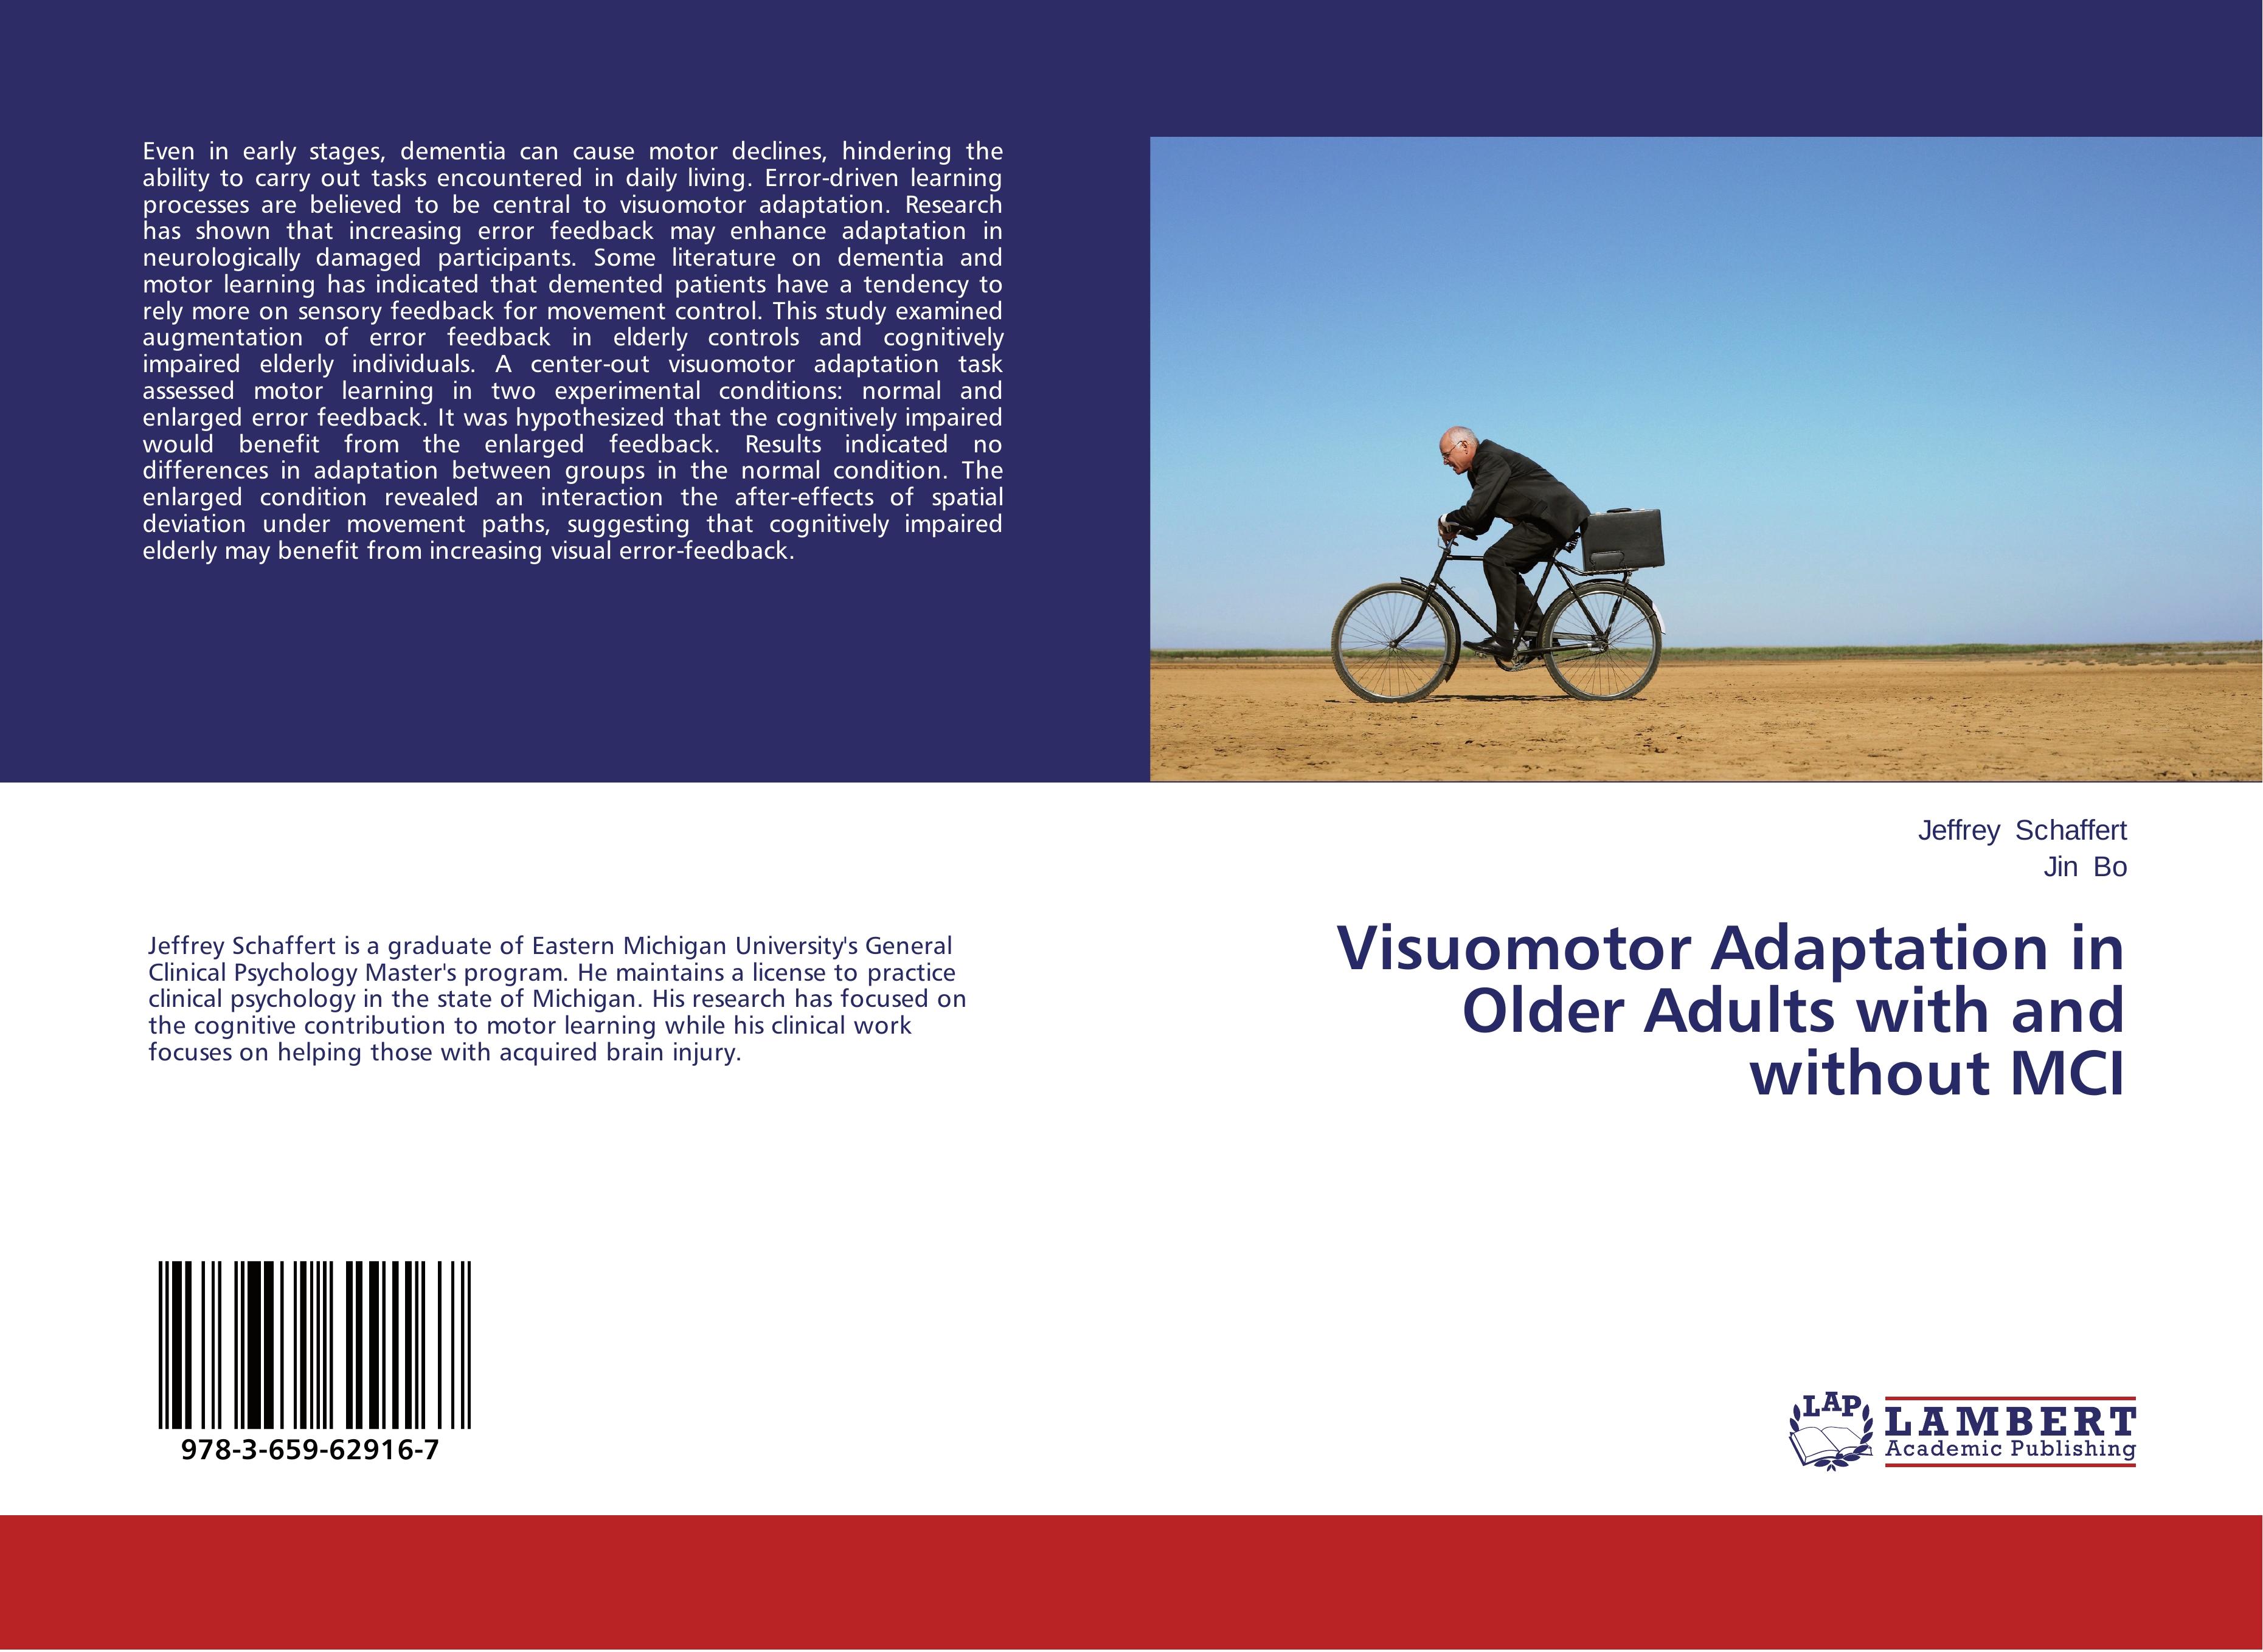 Visuomotor Adaptation in Older Adults with and without MCI - Jeffrey Schaffert|Jin Bo